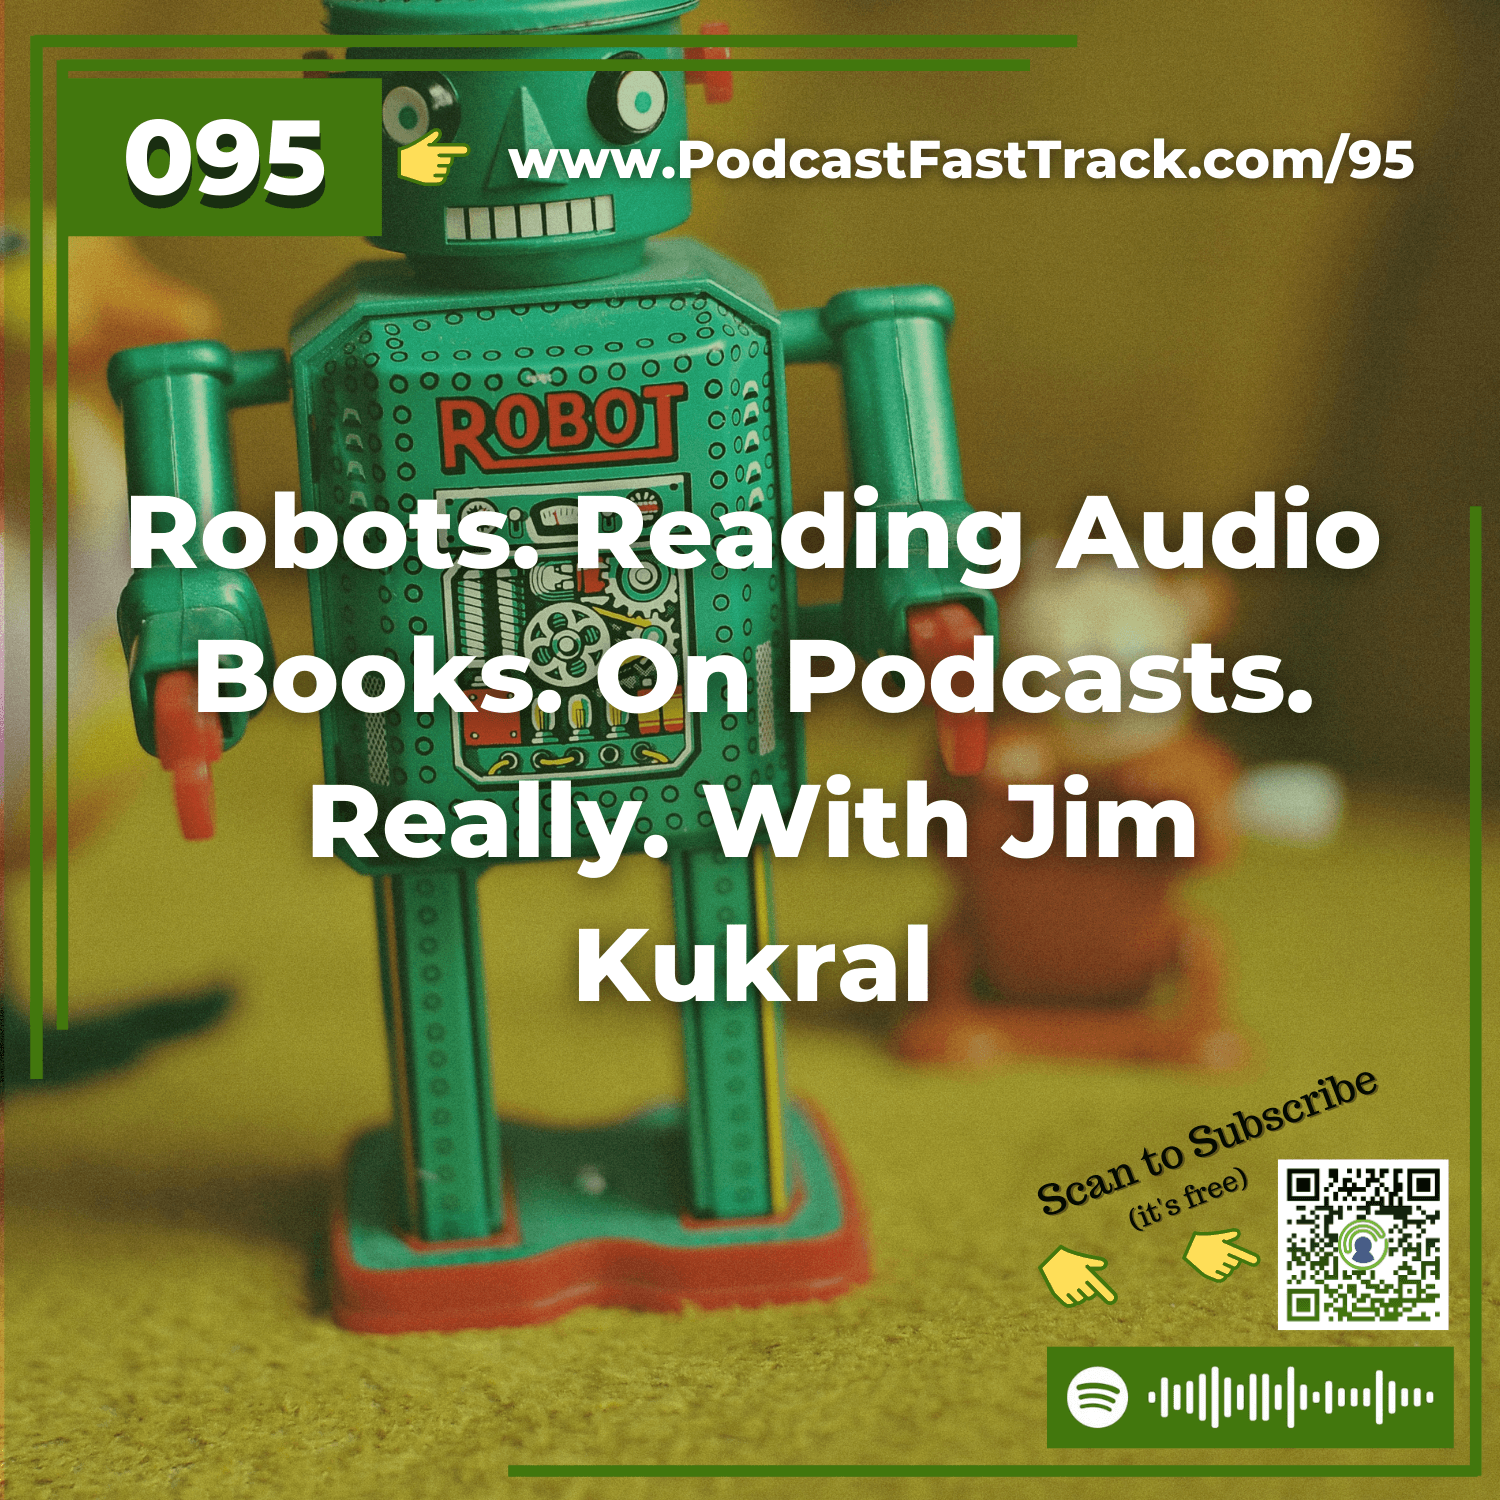 95: Robots. Reading Audio Books. On Podcasts. Really. With Jim Kukral